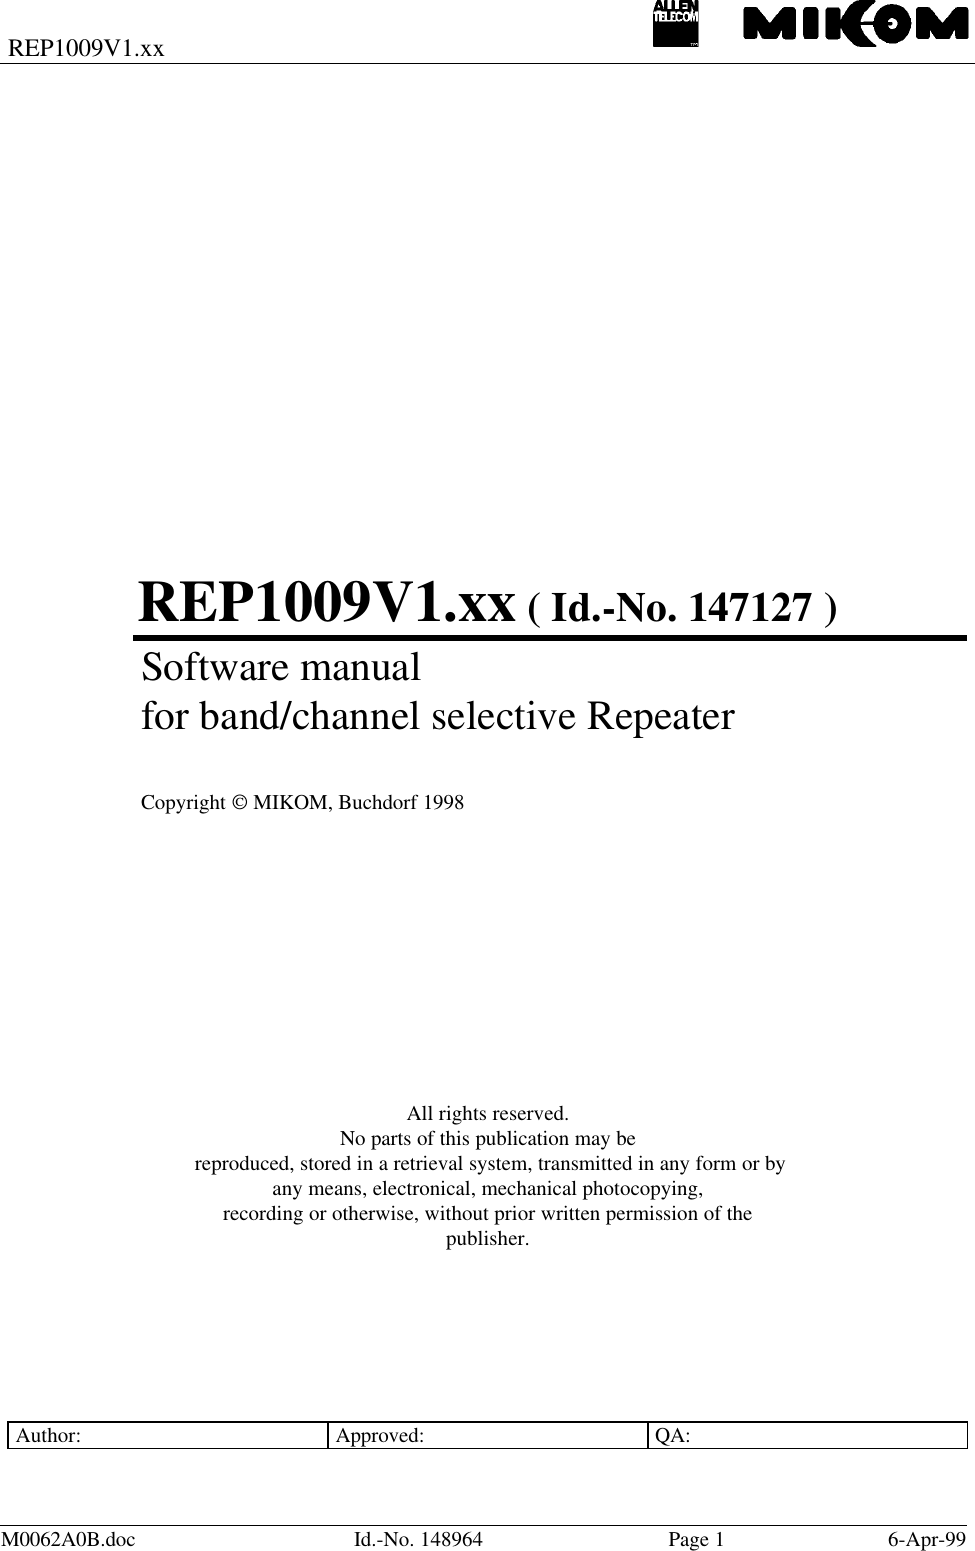 REP1009V1.xxM0062A0B.doc Id.-No. 148964 Page 16-Apr-99REP1009V1.xx ( Id.-No. 147127 )Software manualfor band/channel selective RepeaterCopyright  MIKOM, Buchdorf 1998All rights reserved.No parts of this publication may be reproduced, stored in a retrieval system, transmitted in any form or byany means, electronical, mechanical photocopying,recording or otherwise, without prior written permission of thepublisher.Author: Approved: QA: